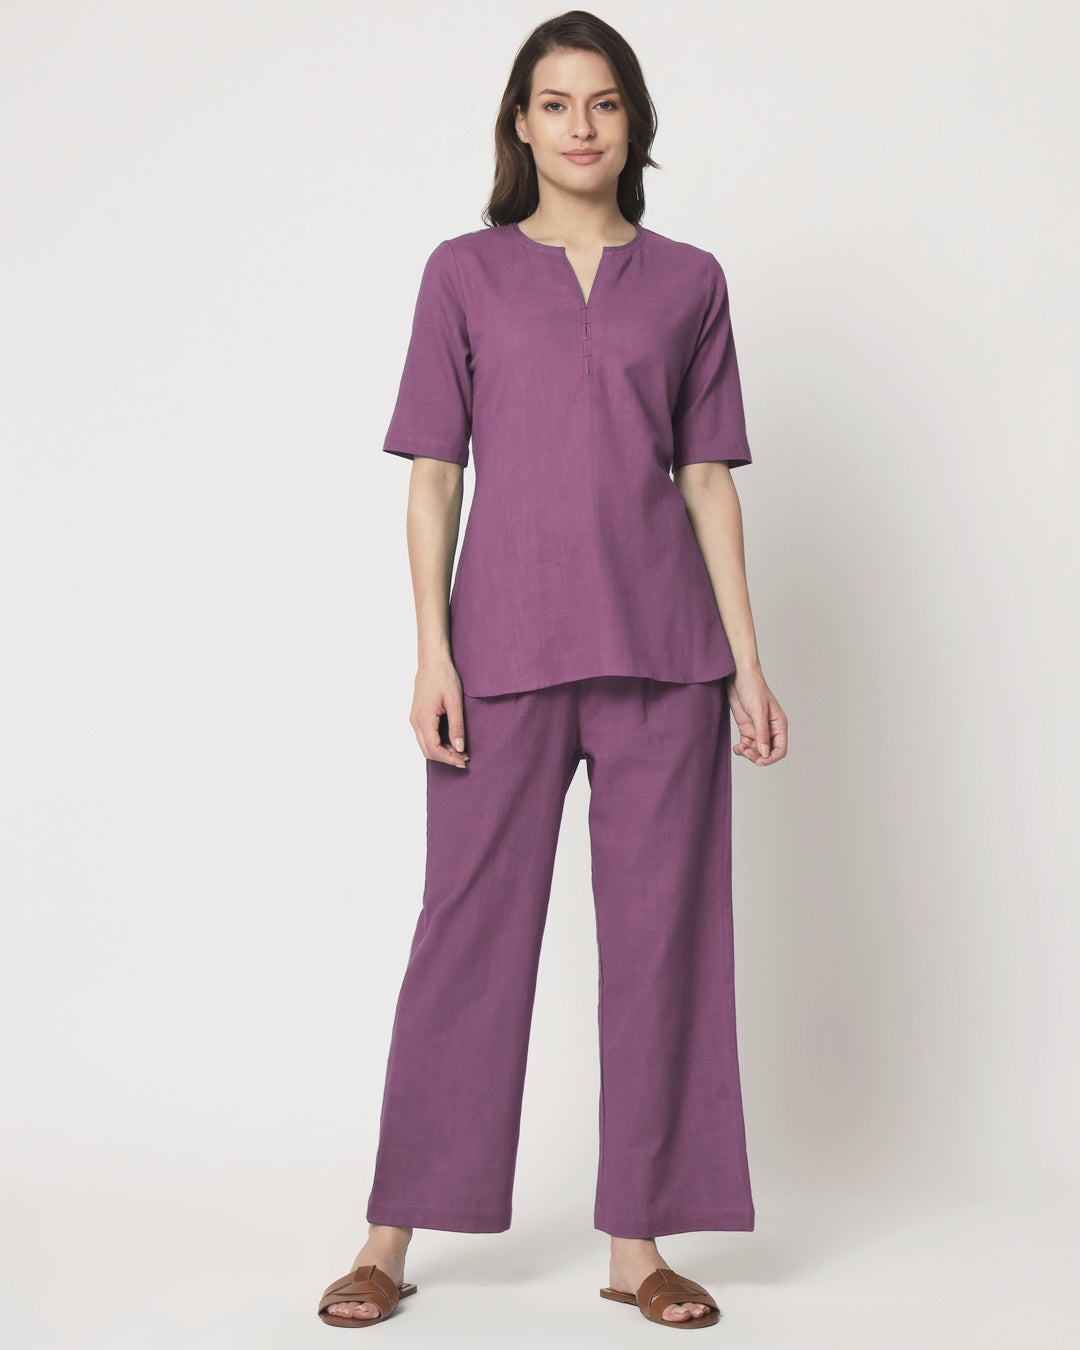 Wisteria Purple Collar Neck Short Length Solid Co-ord Set